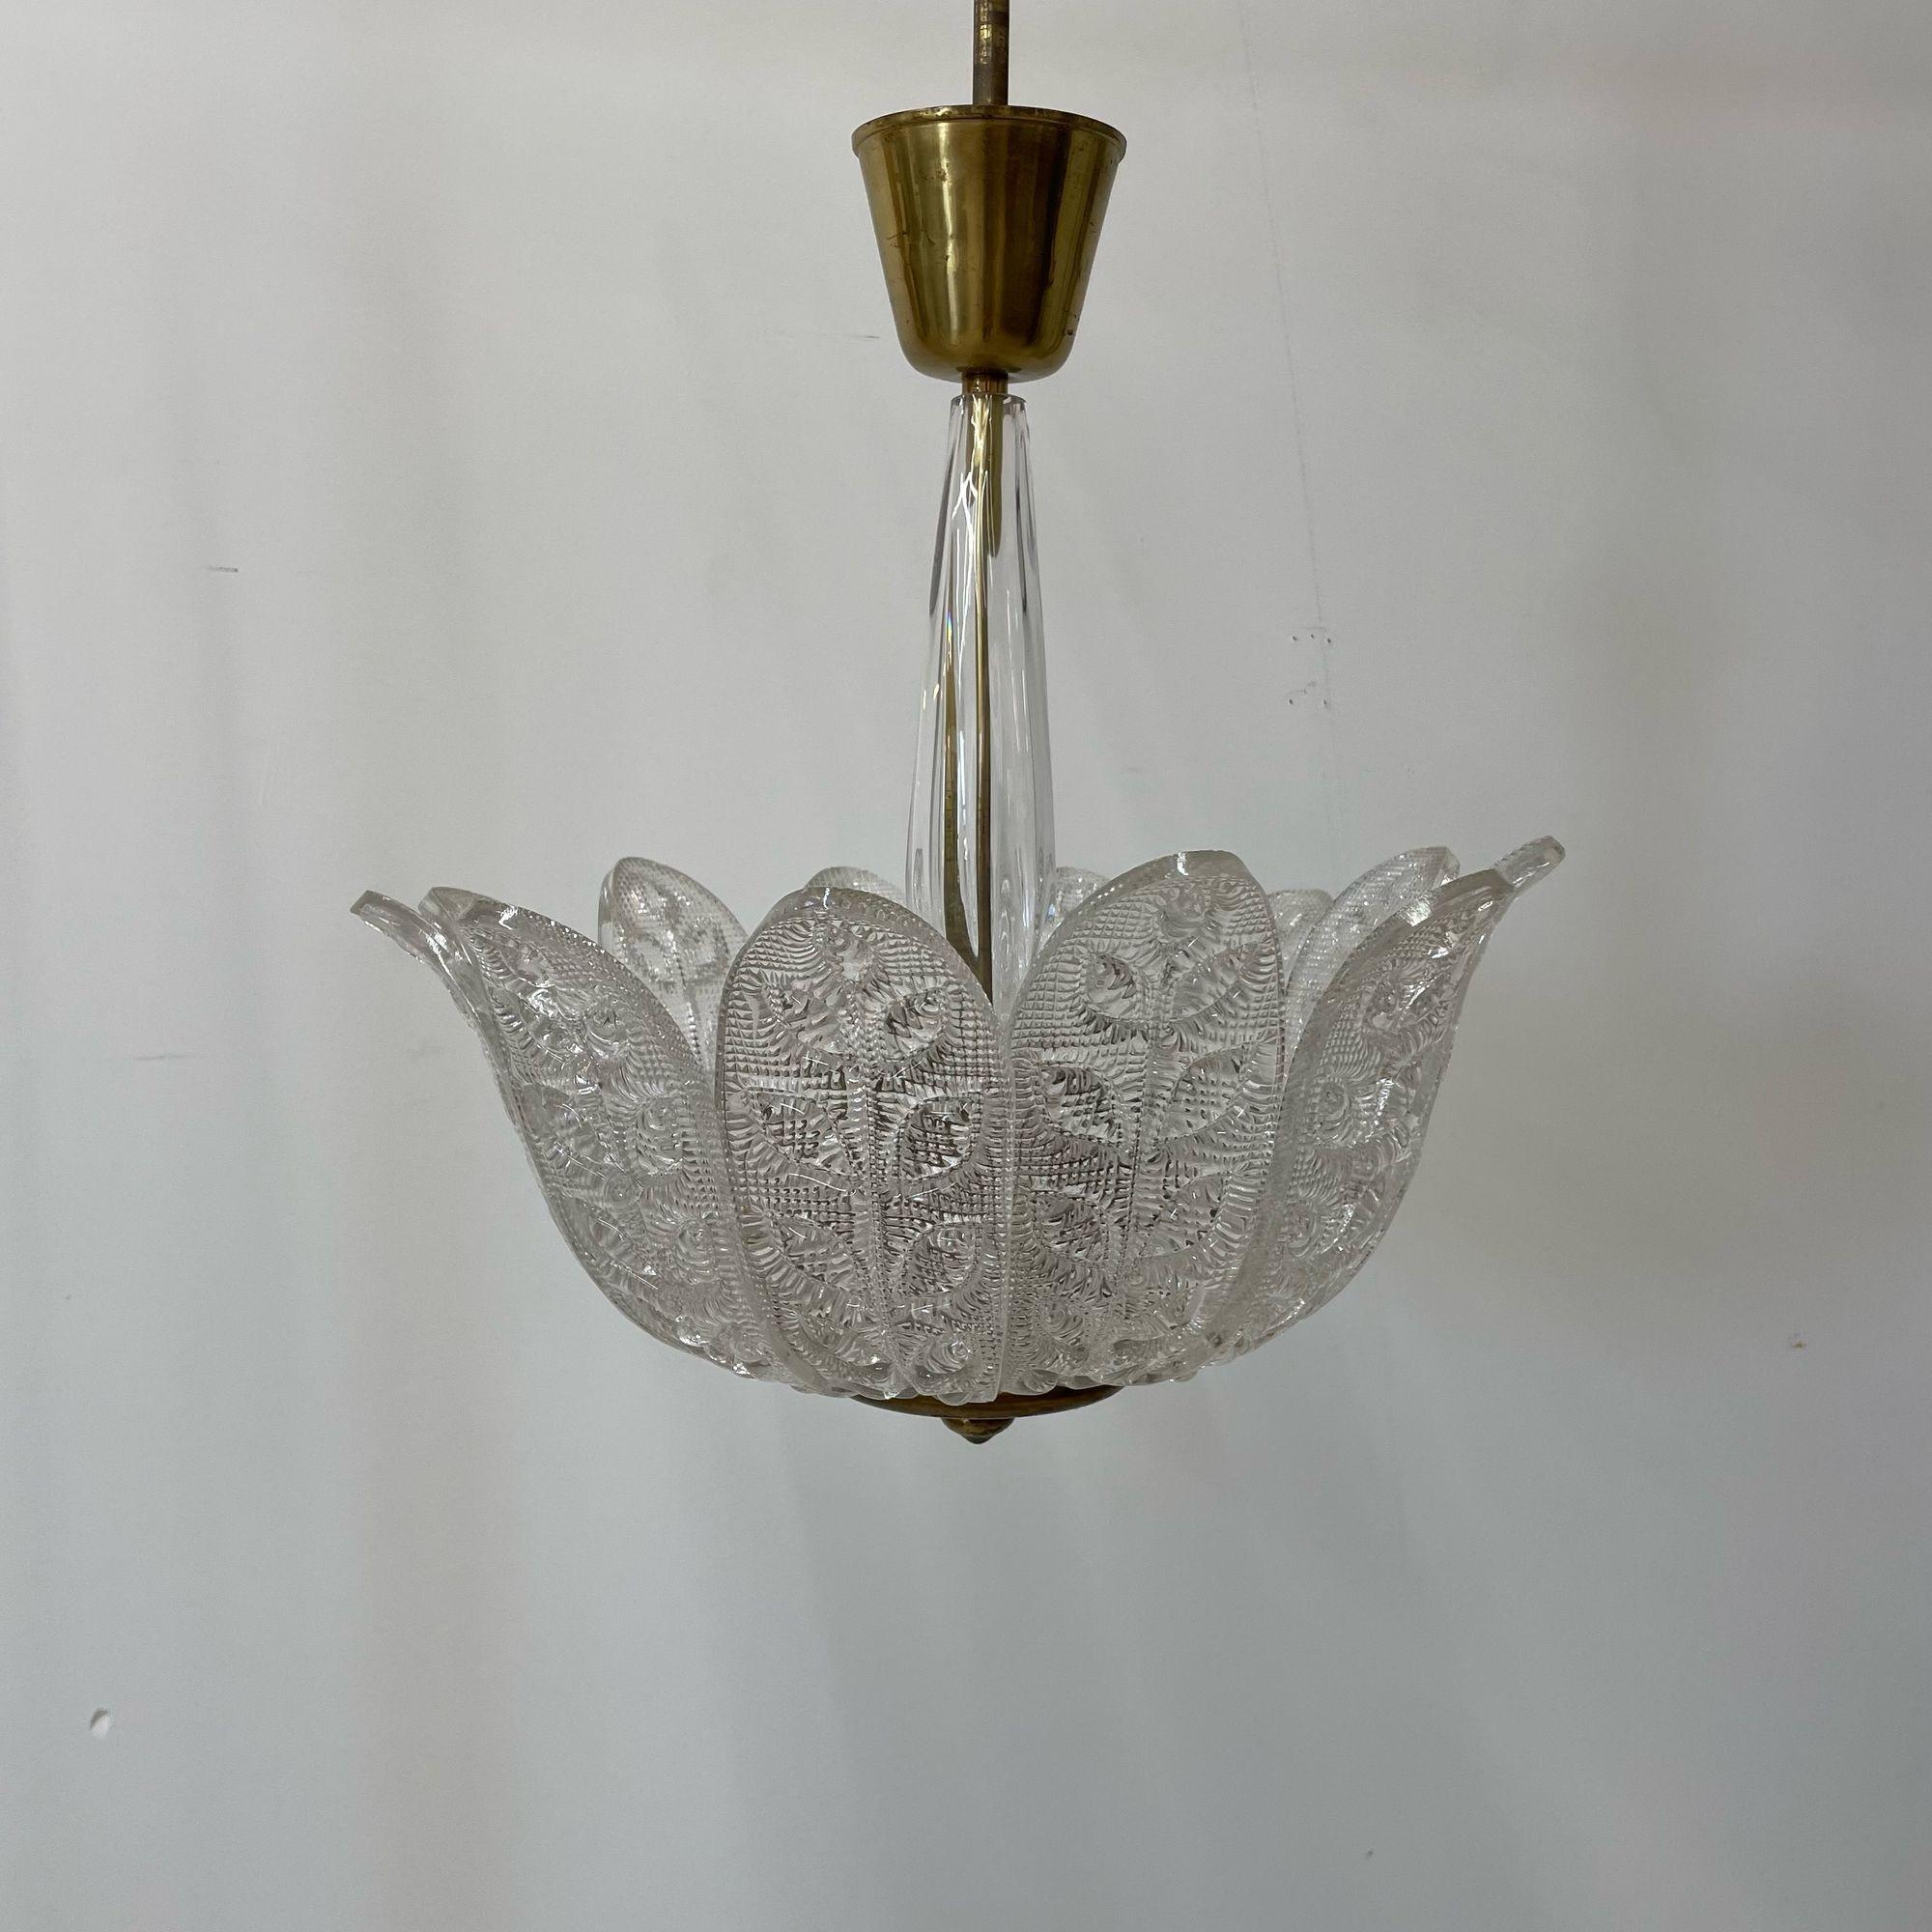 Swedish Mid-Century Modern Glass Flower Petal Chandelier by Carl Fagerlund 1940s In Good Condition For Sale In Stamford, CT